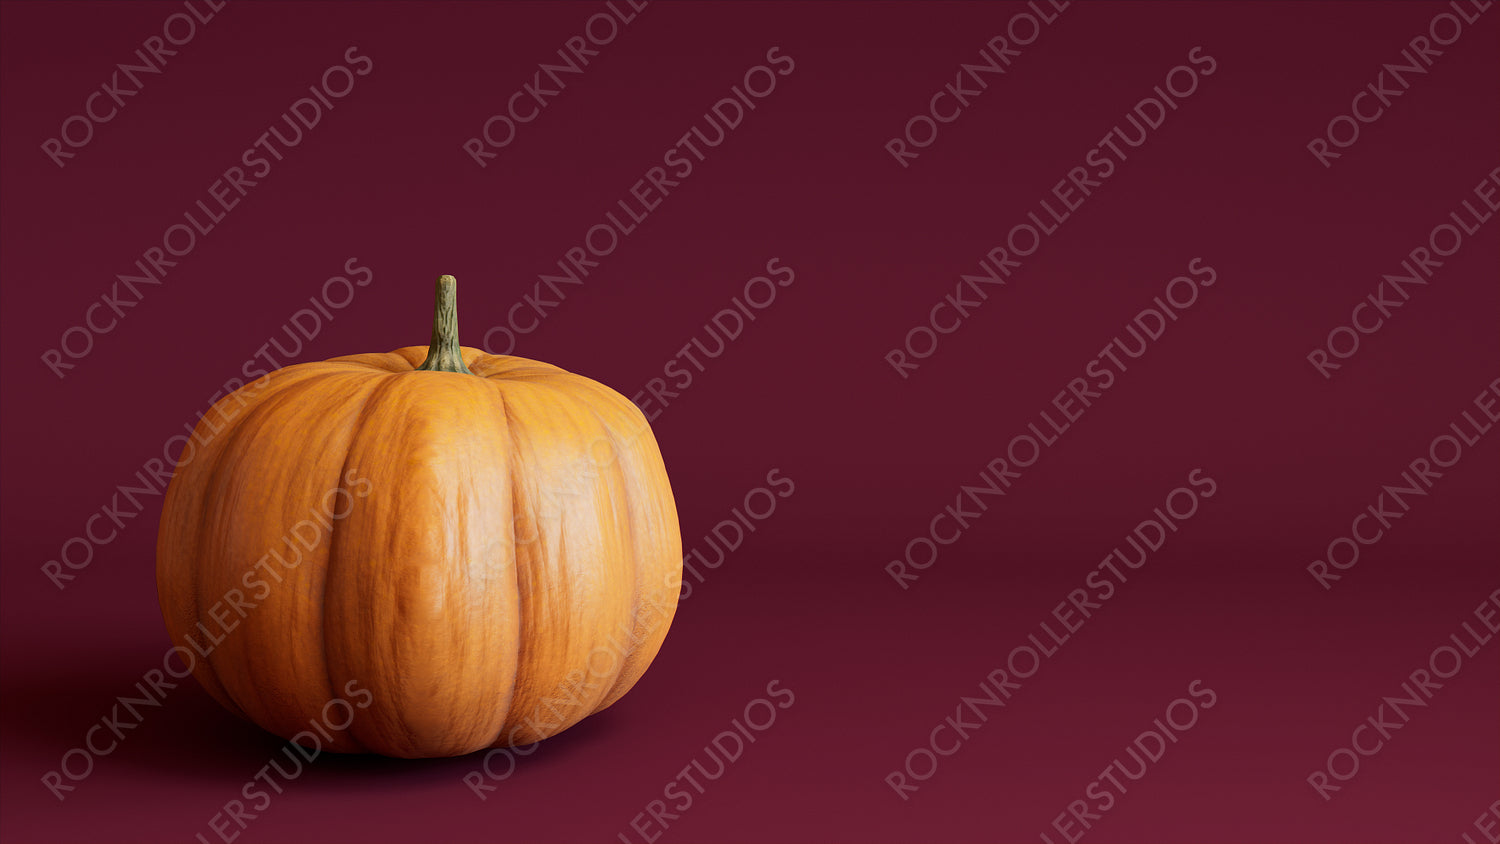 Pumpkin on a Burgundy colored background. Fall themed Image with copy-space.